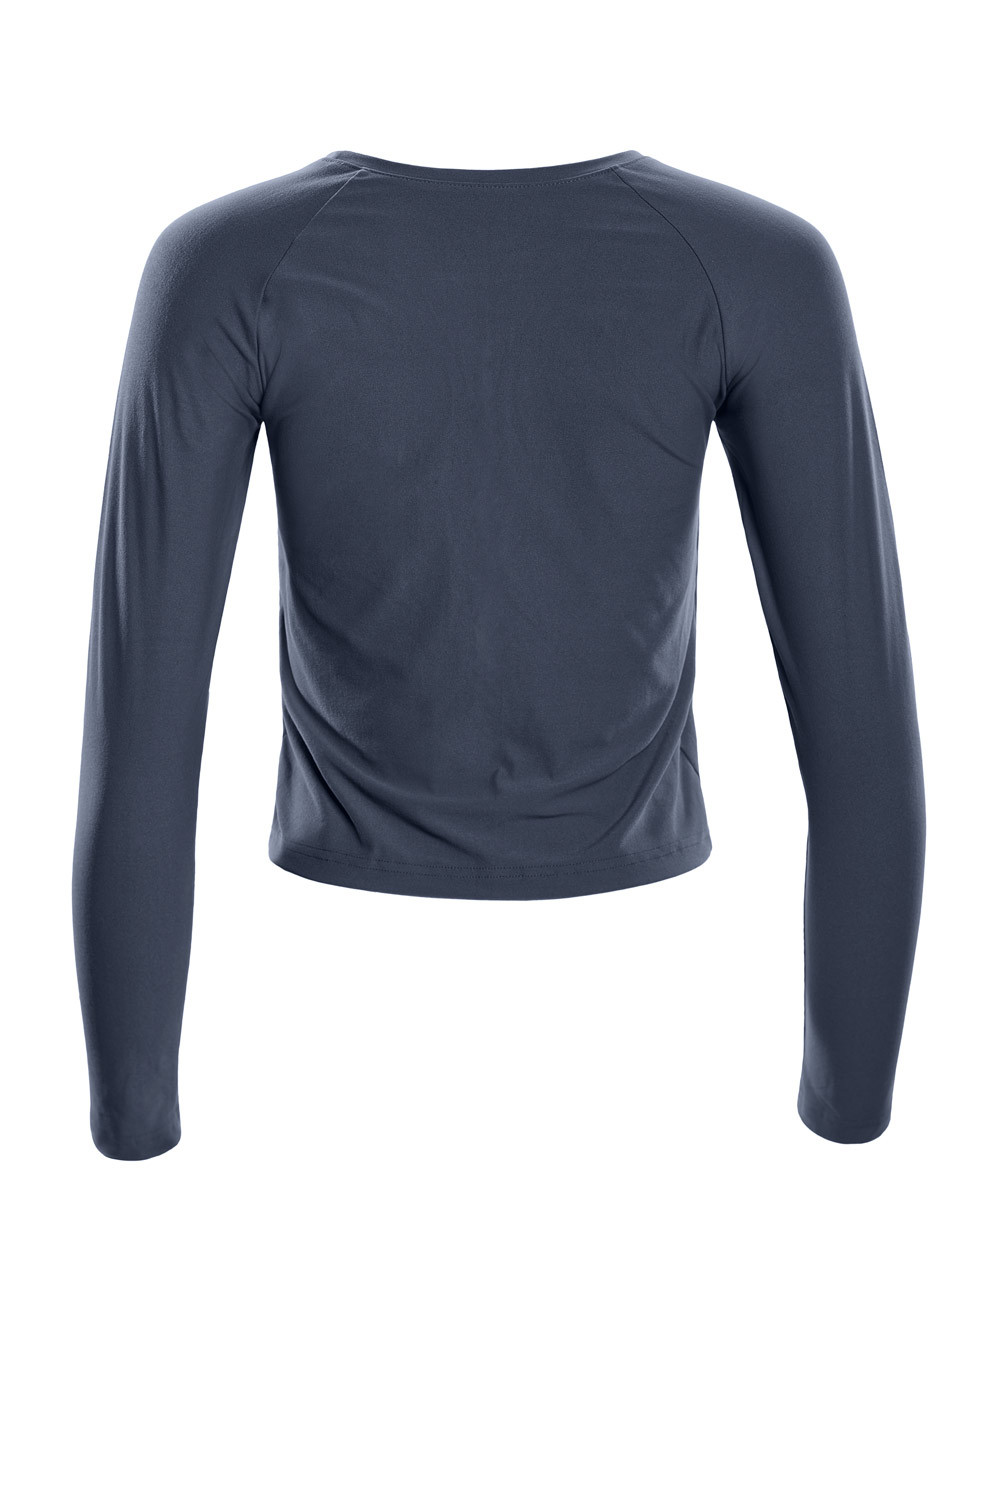 Functional Light and Top Long Cropped Winshape Sleeve Ultra AET119LS, Soft anthrazit, Style Soft